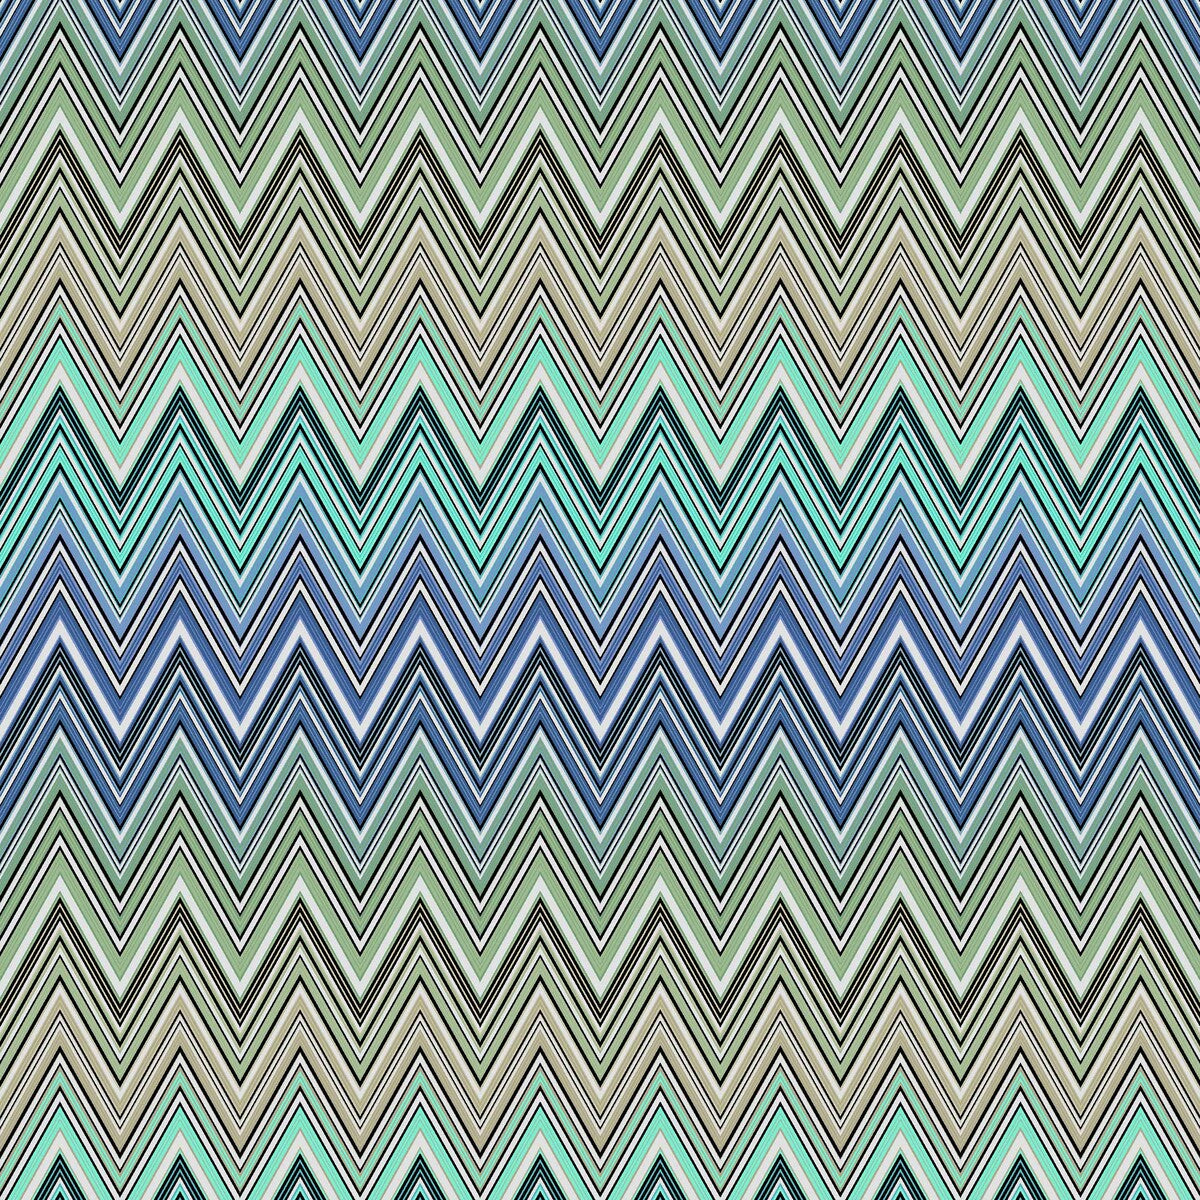 Kew Mtc Outdoor fabric in 170 color - pattern 36164.523.0 - by Kravet Couture in the Missoni Home collection